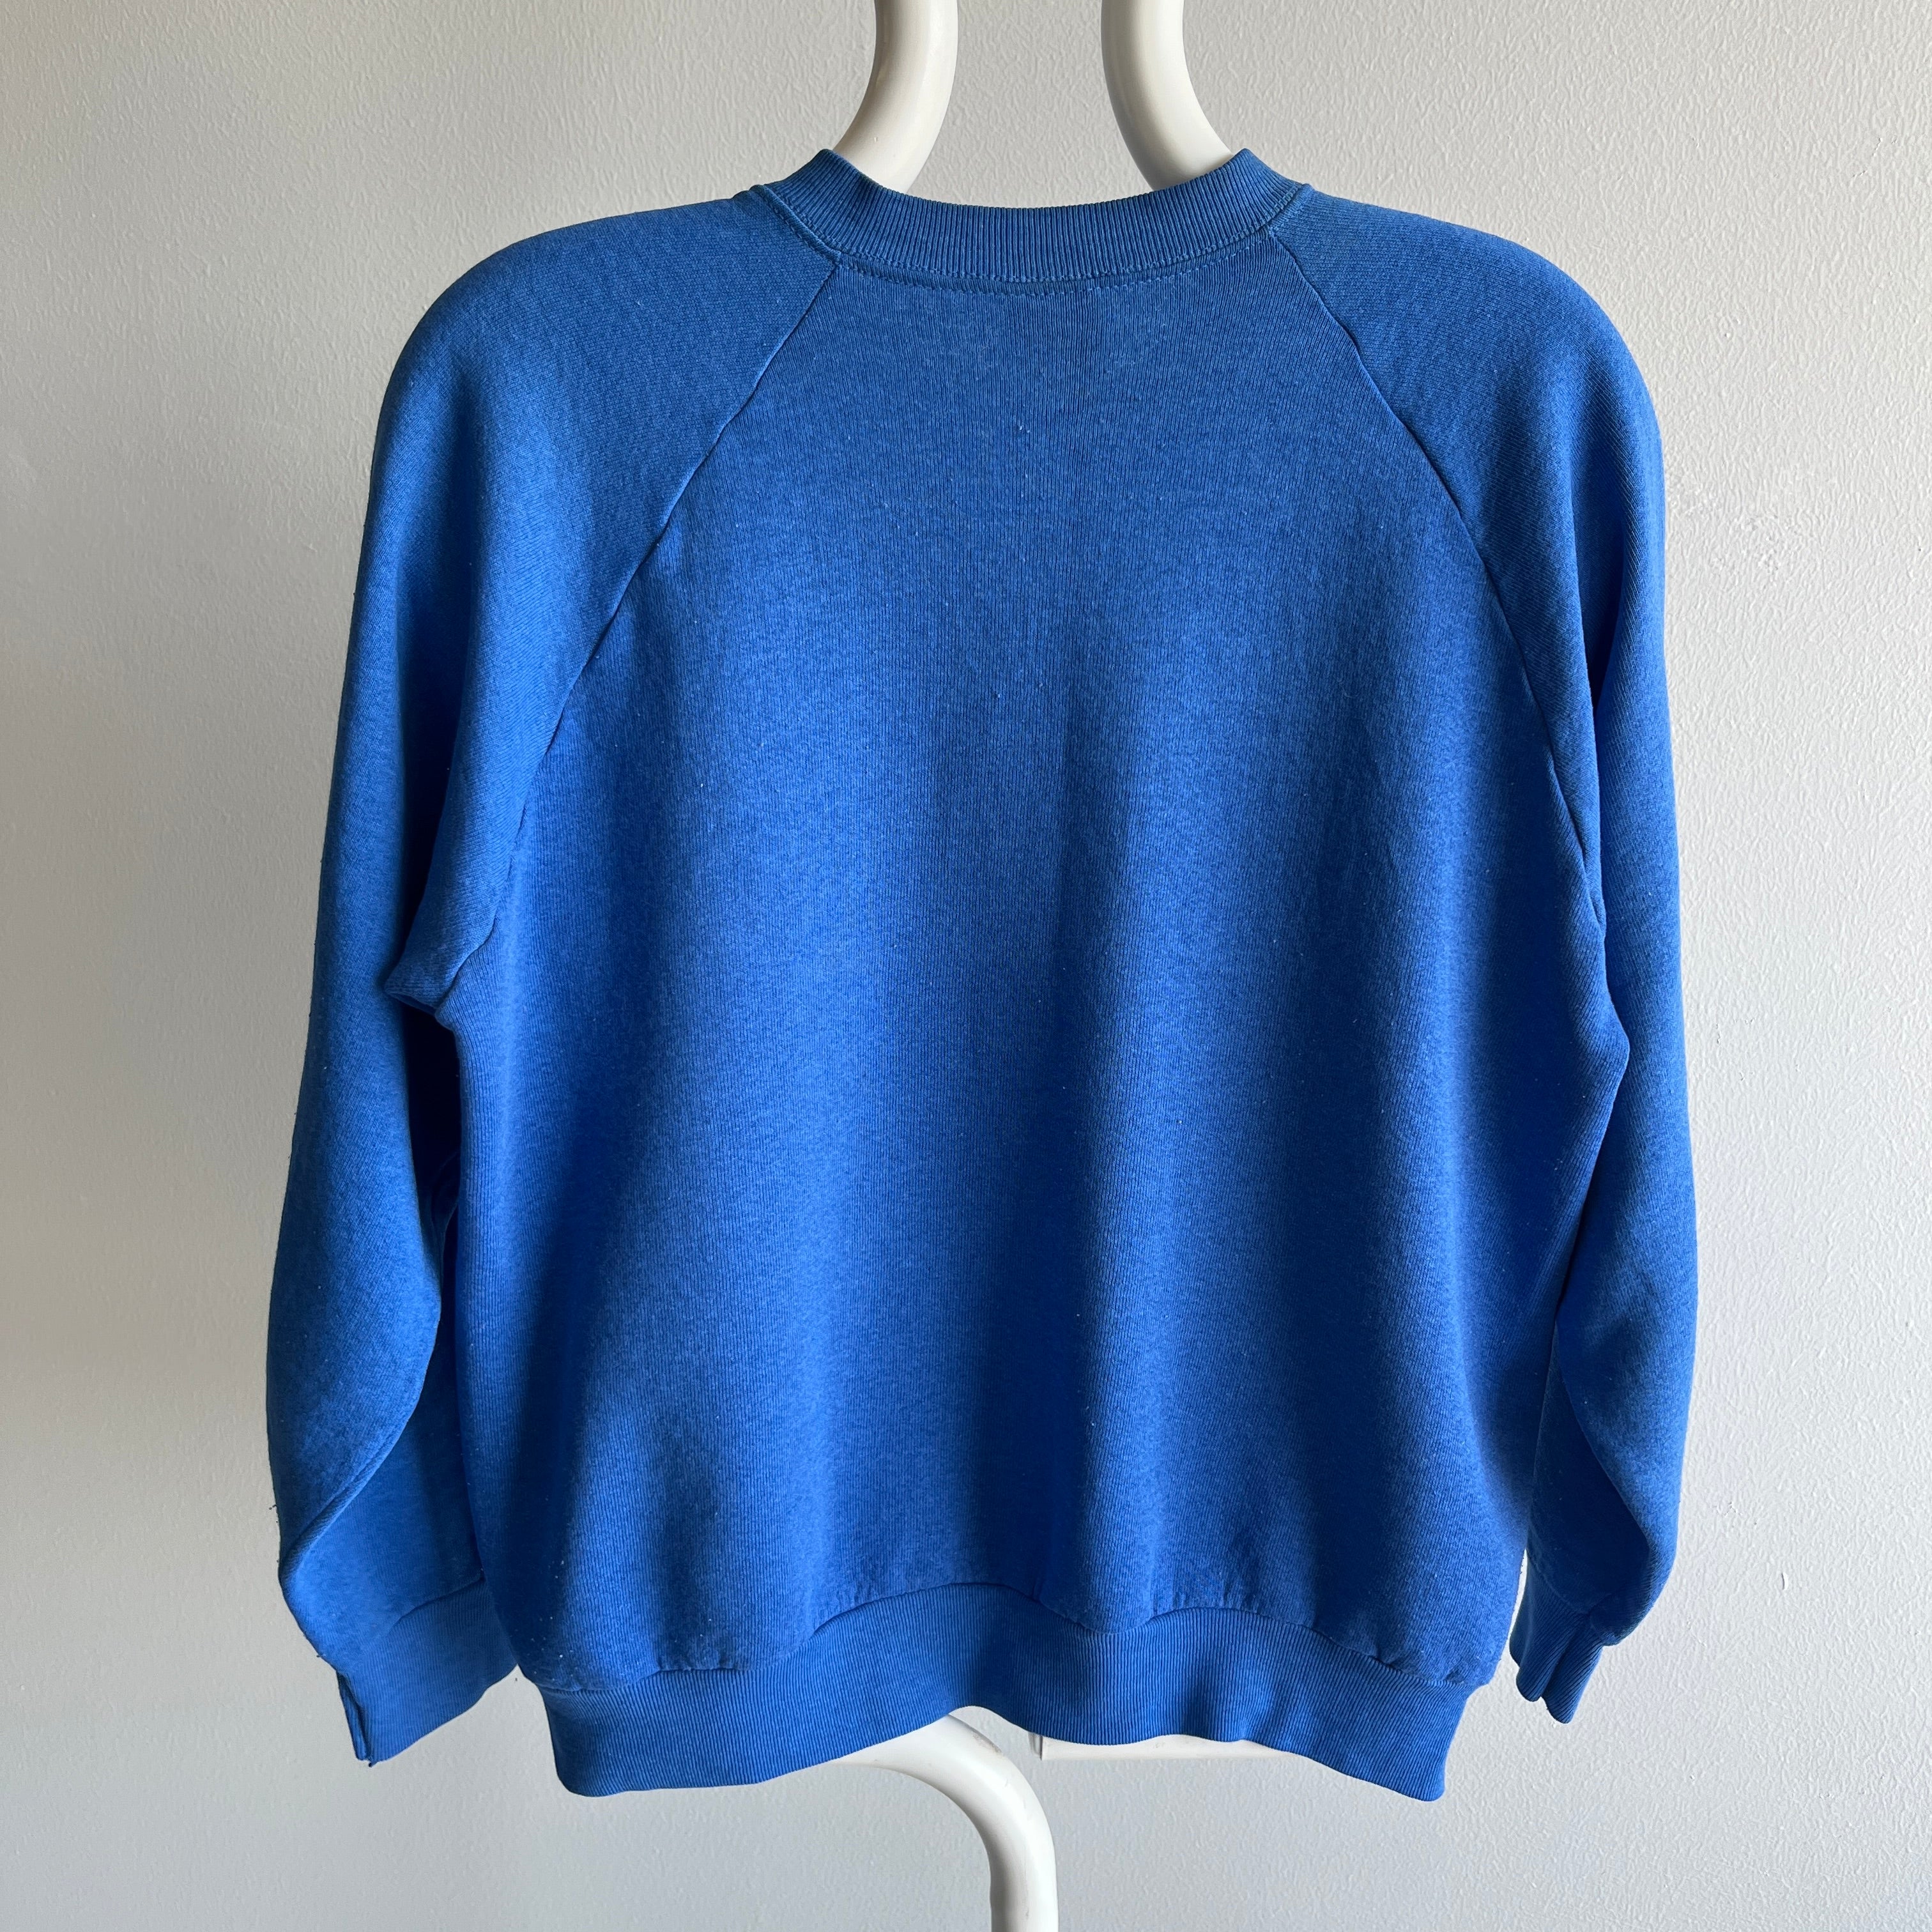 1980s FOTL Heavily Thinned Out and Pilled Faded Blue Sweatshirt